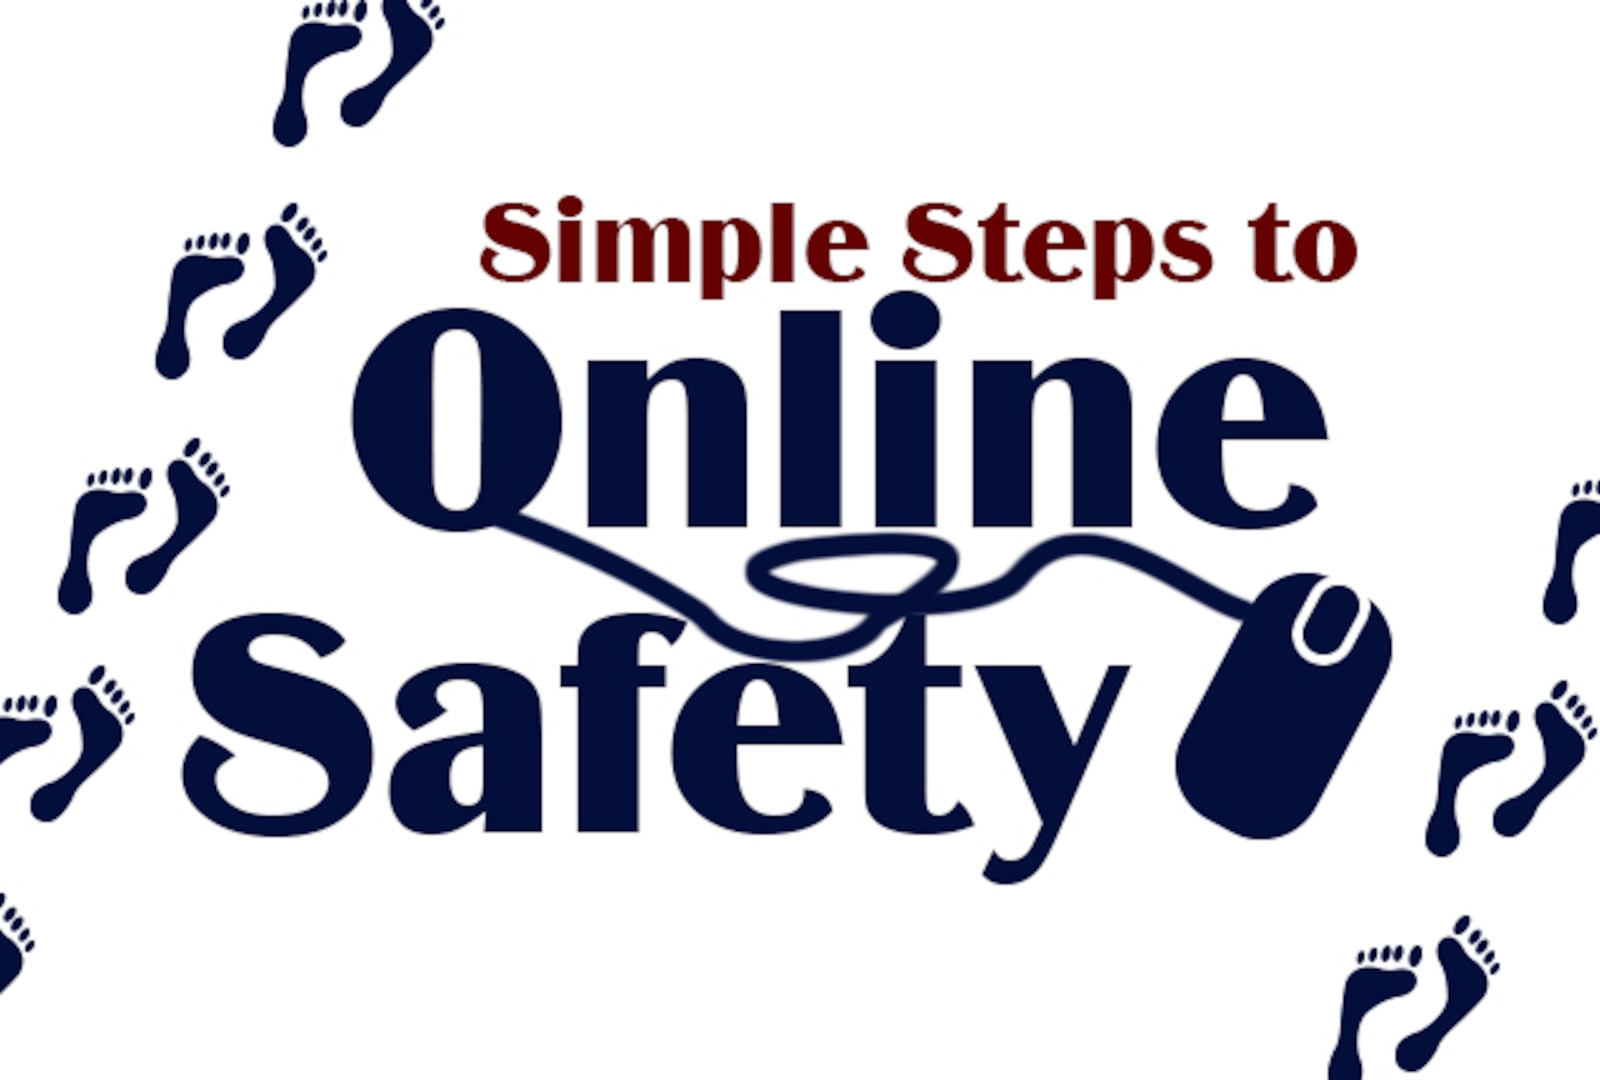 Simple steps to online safety.